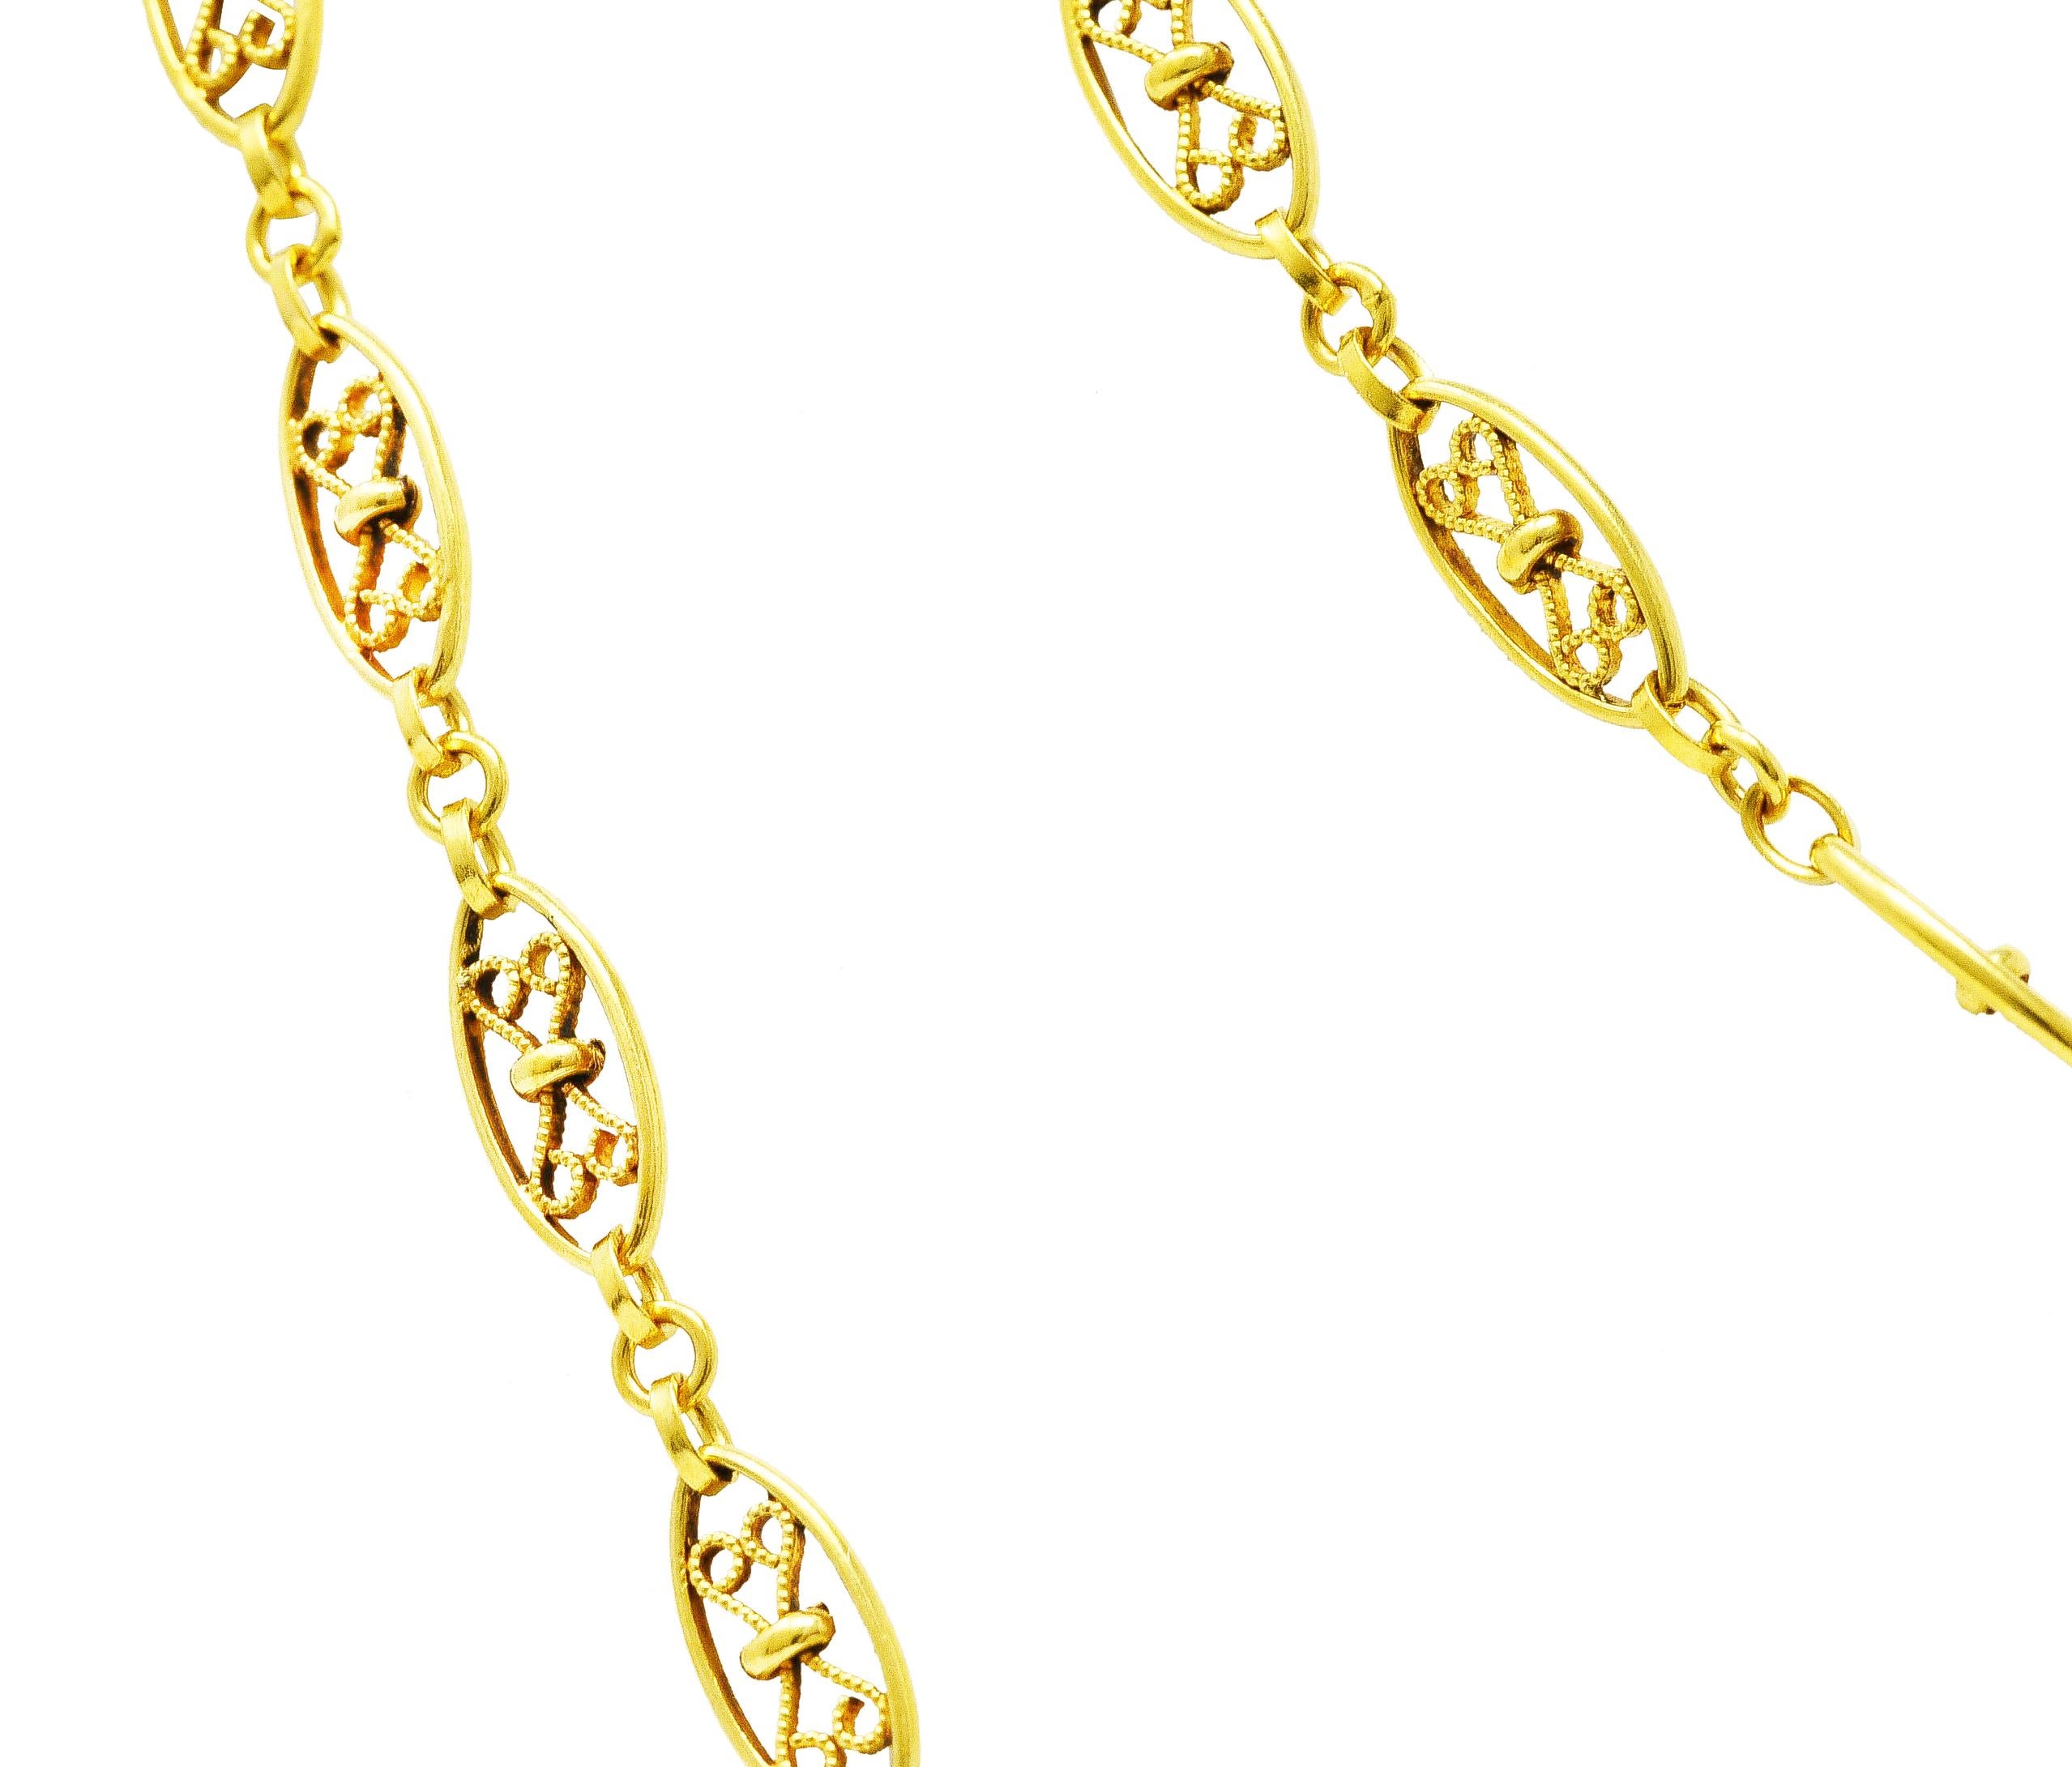 French Victorian 18 Karat Yellow Gold Heart Chain Link Necklace 3